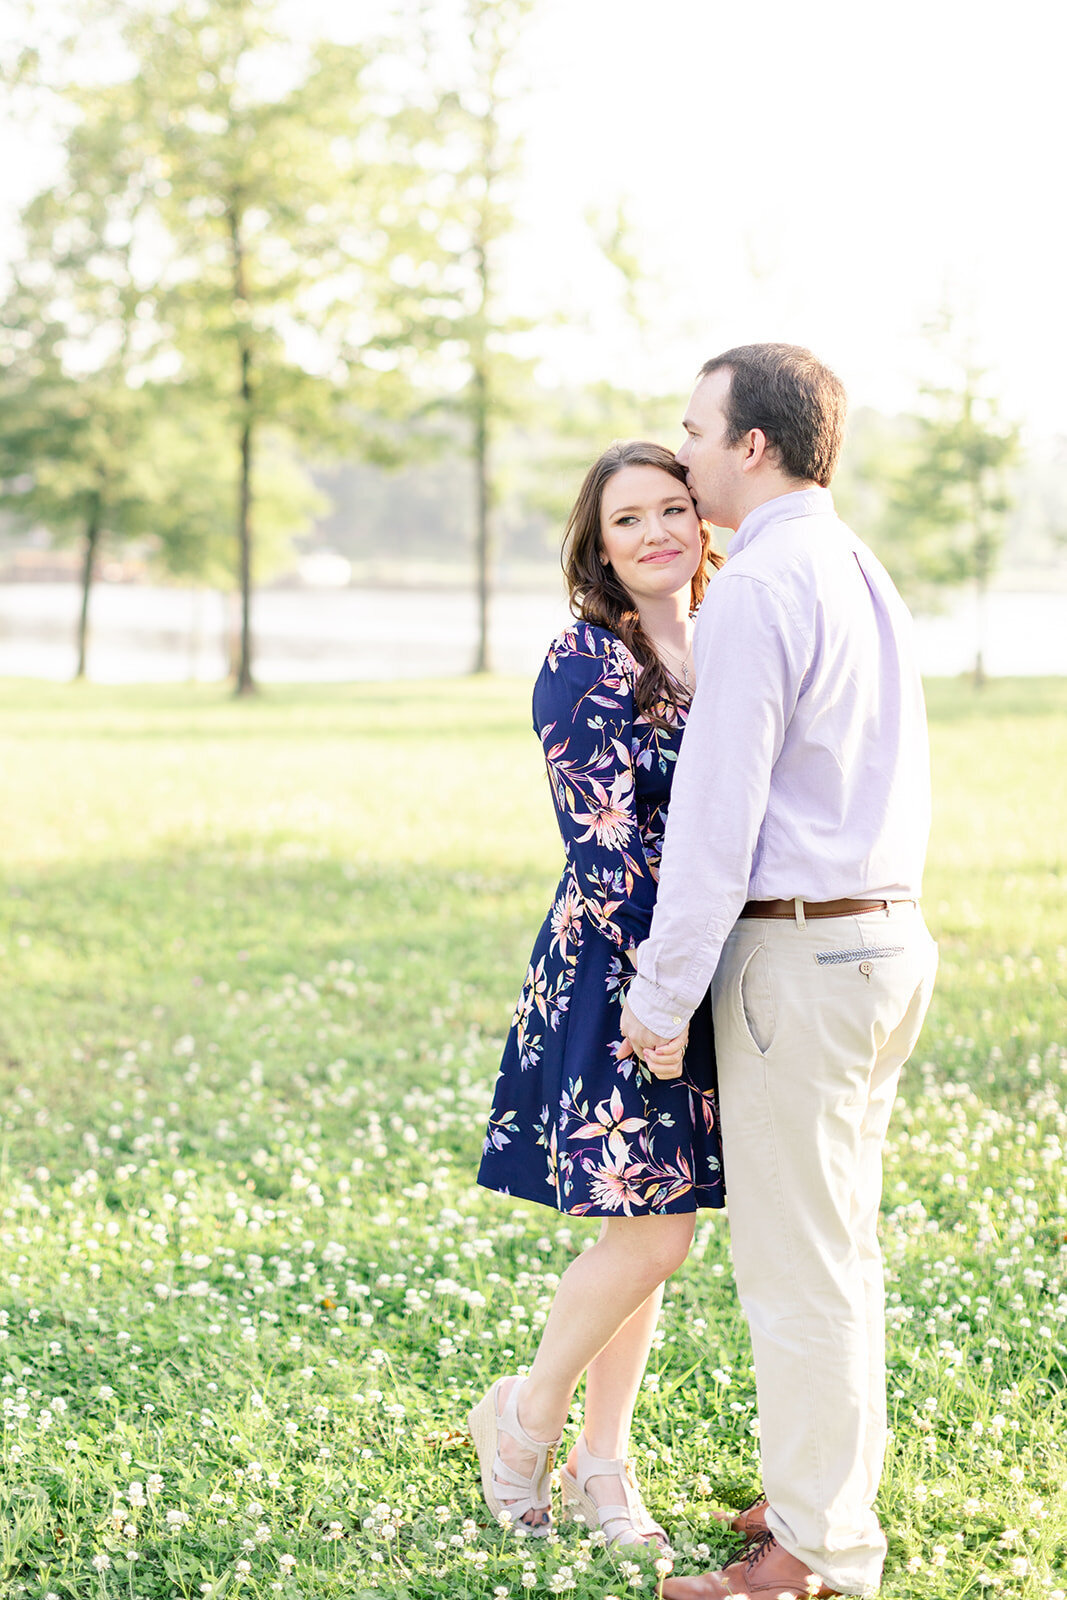 Engagement photo of guy kissing girl on forehead